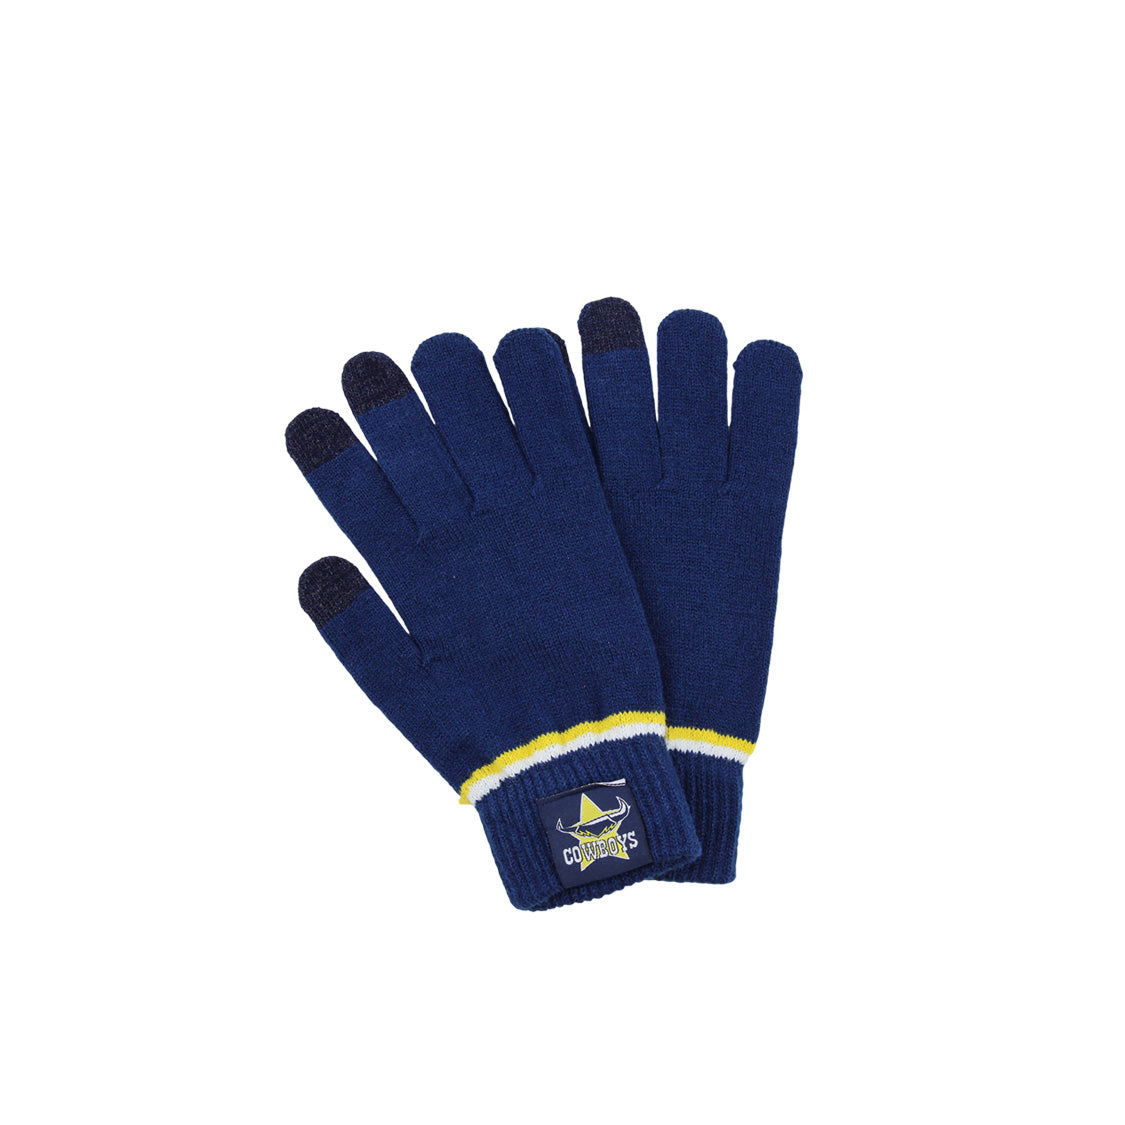 NORTH QUEENSLAND COWBOYS NRL TOUCHSCREEN GLOVES_NORTH QUEENSLAND COWBOYS_STUBBY CLUB